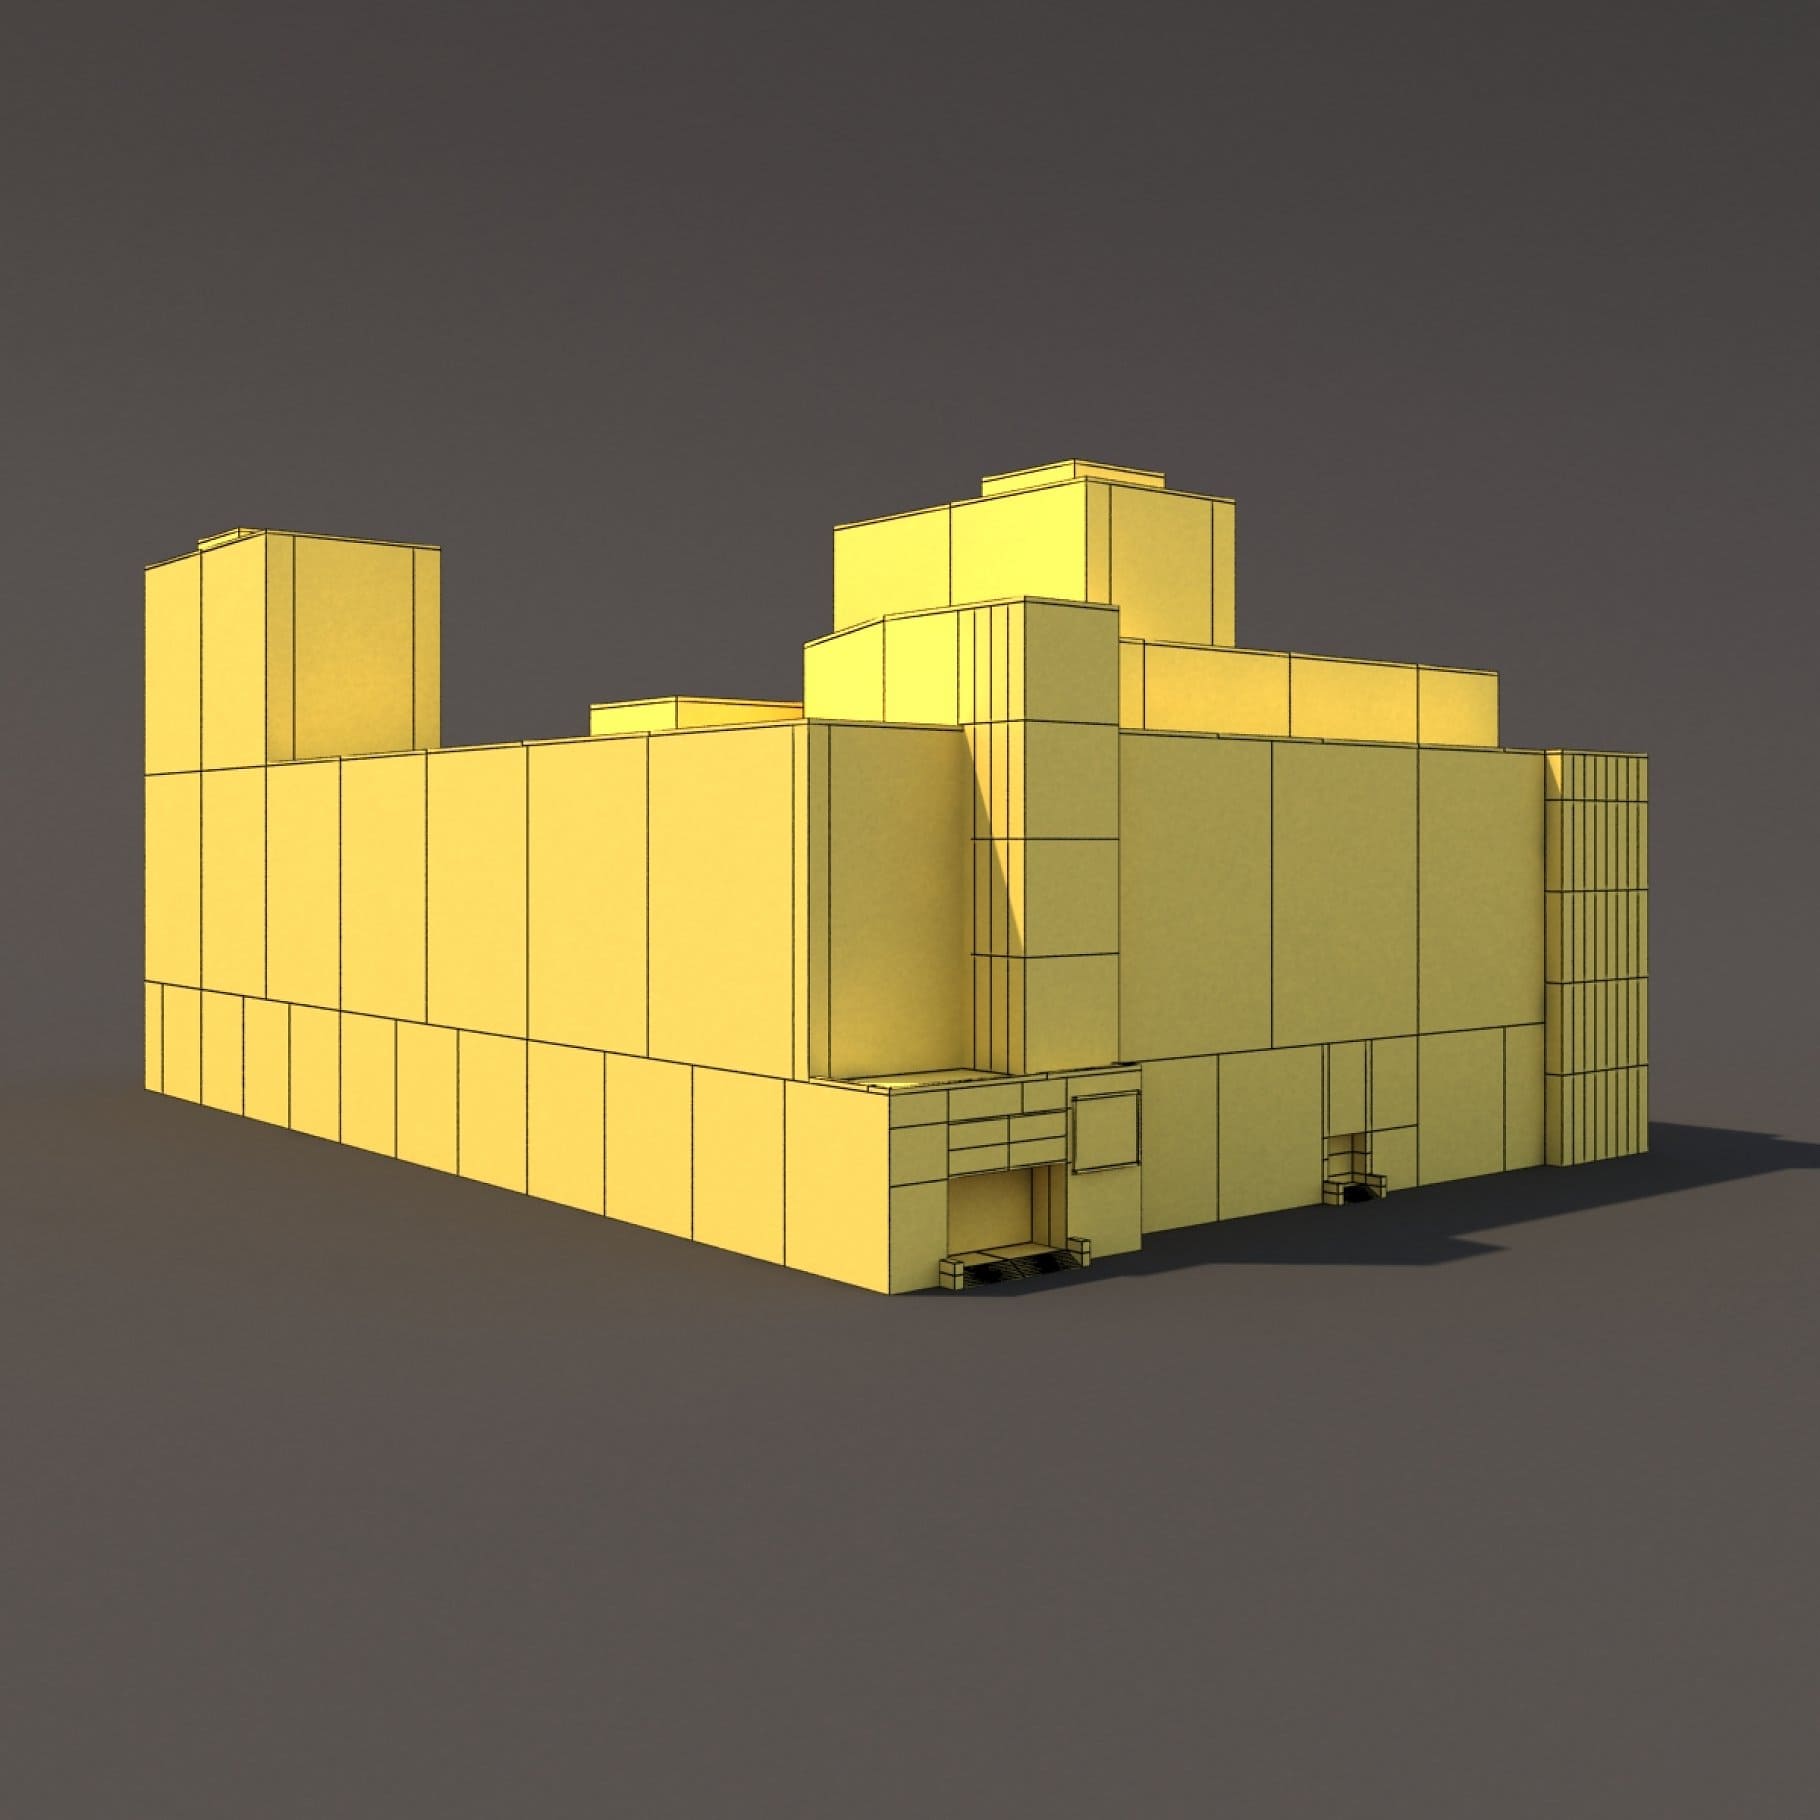 Yellow 3D model of an office building.